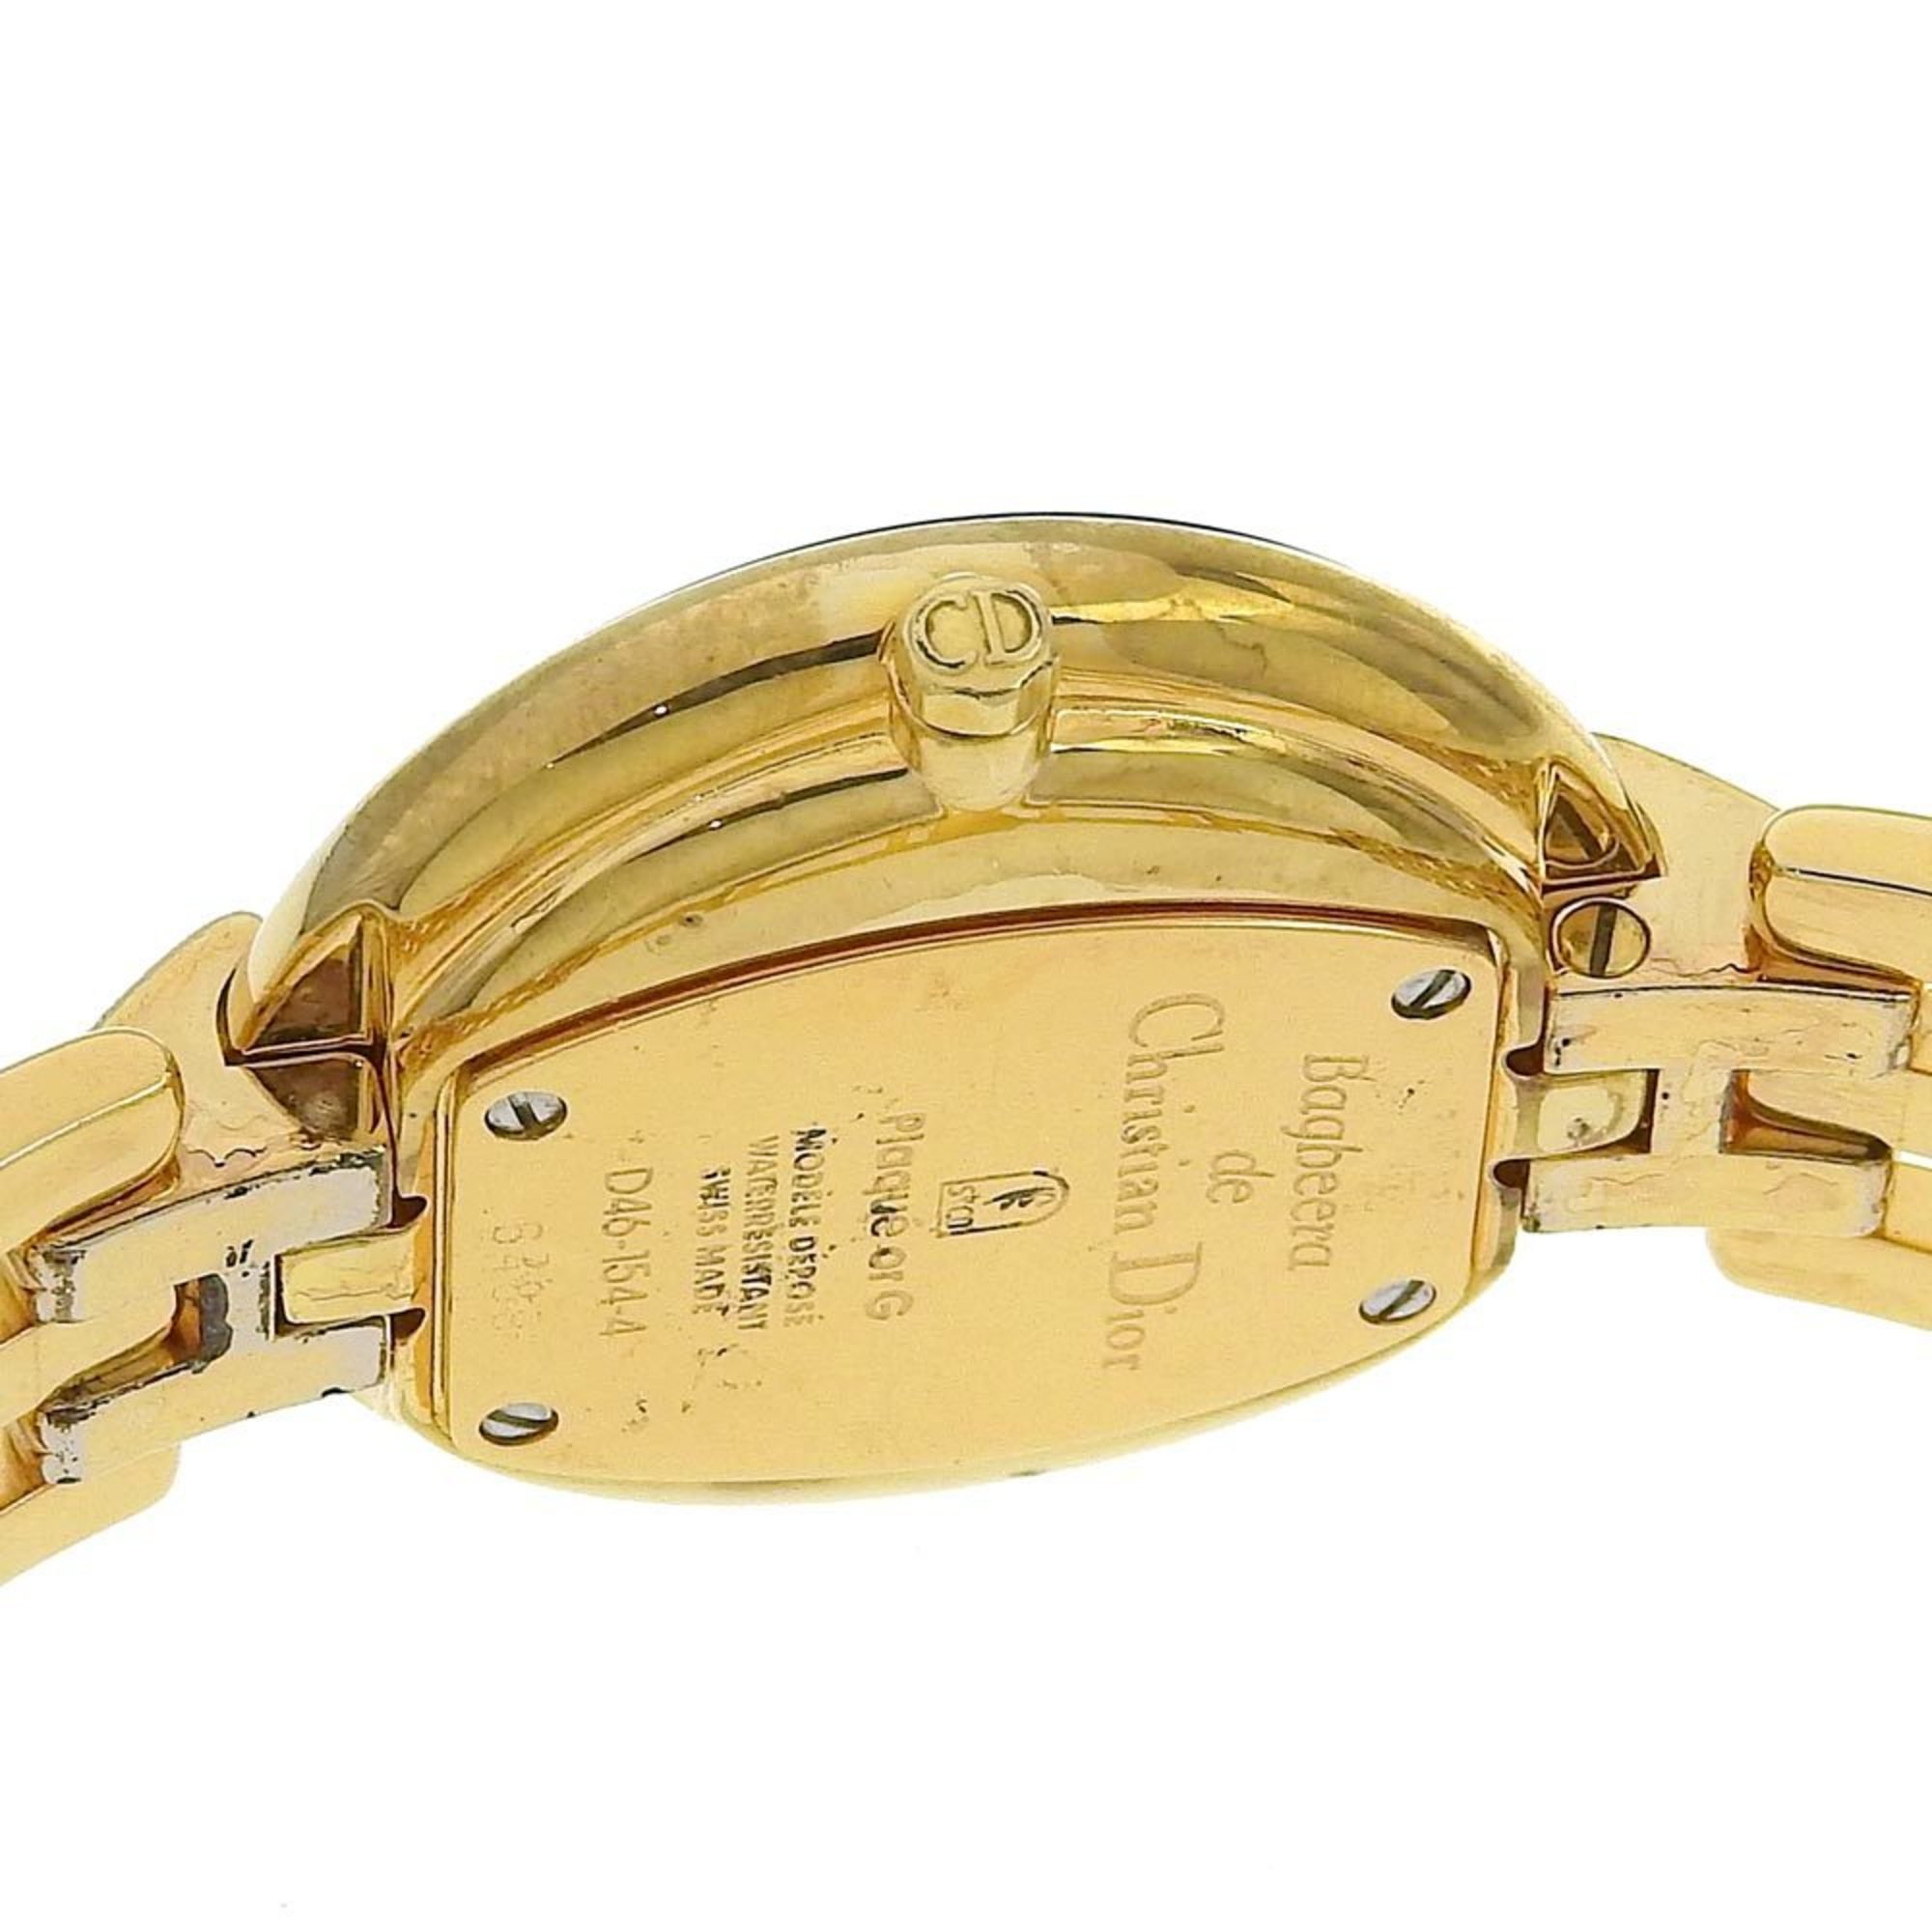 Christian Dior Bagira Watch D46-154-4 Gold Plated x Stainless Steel Quartz Analog Display Black Dial Women's